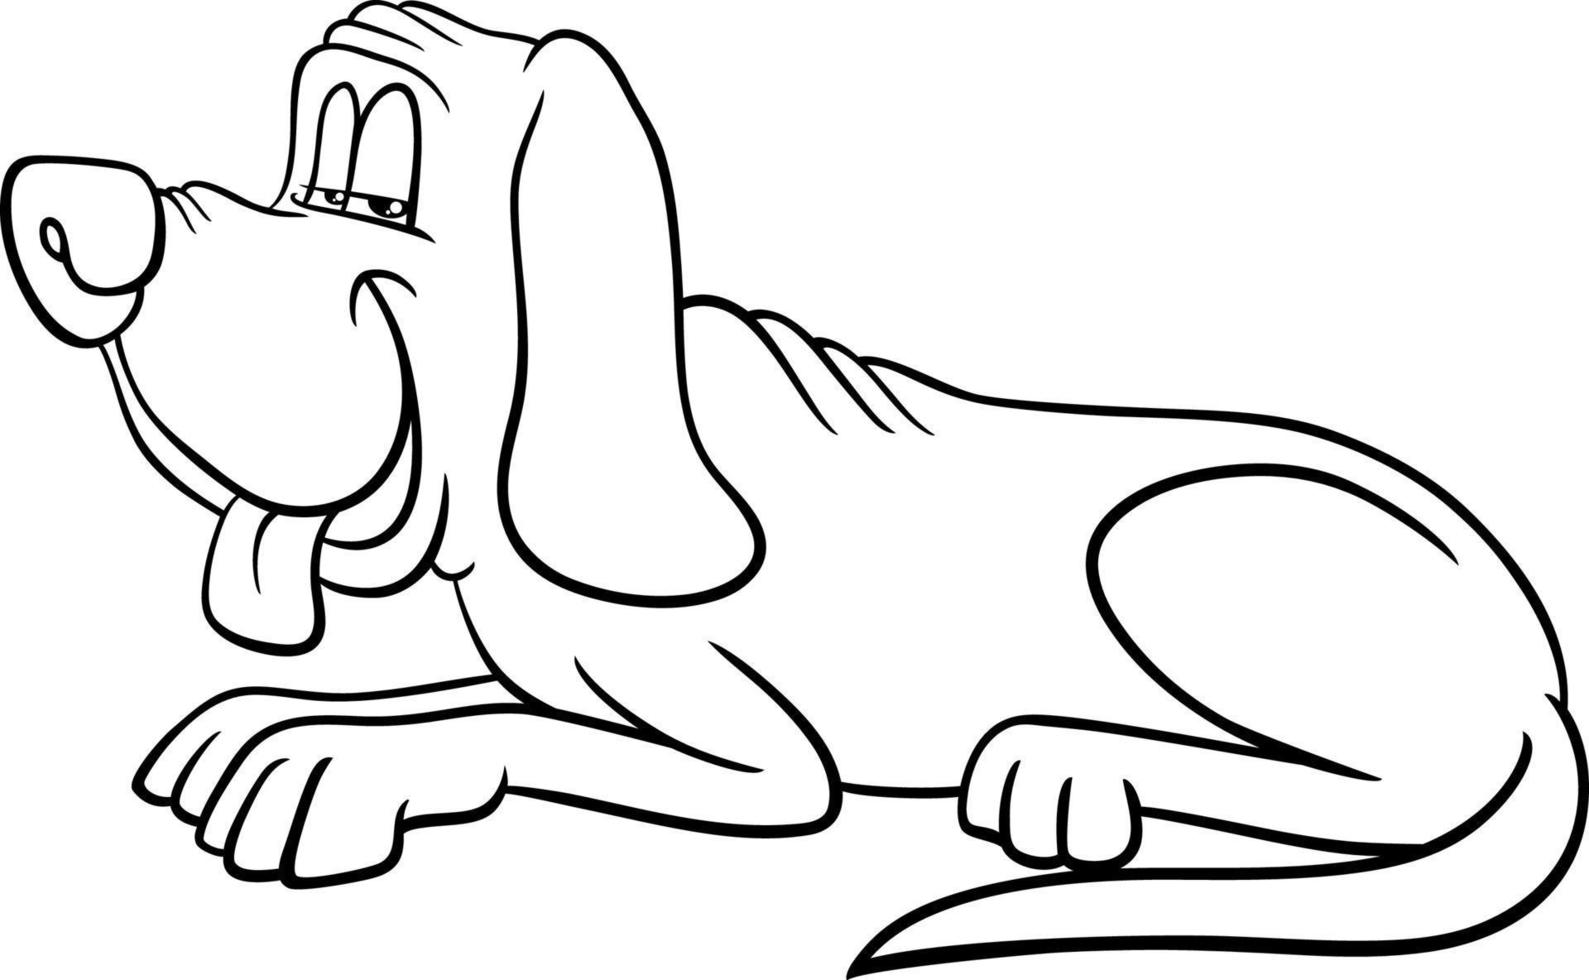 cartoon funny lying dog animal character coloring page vector